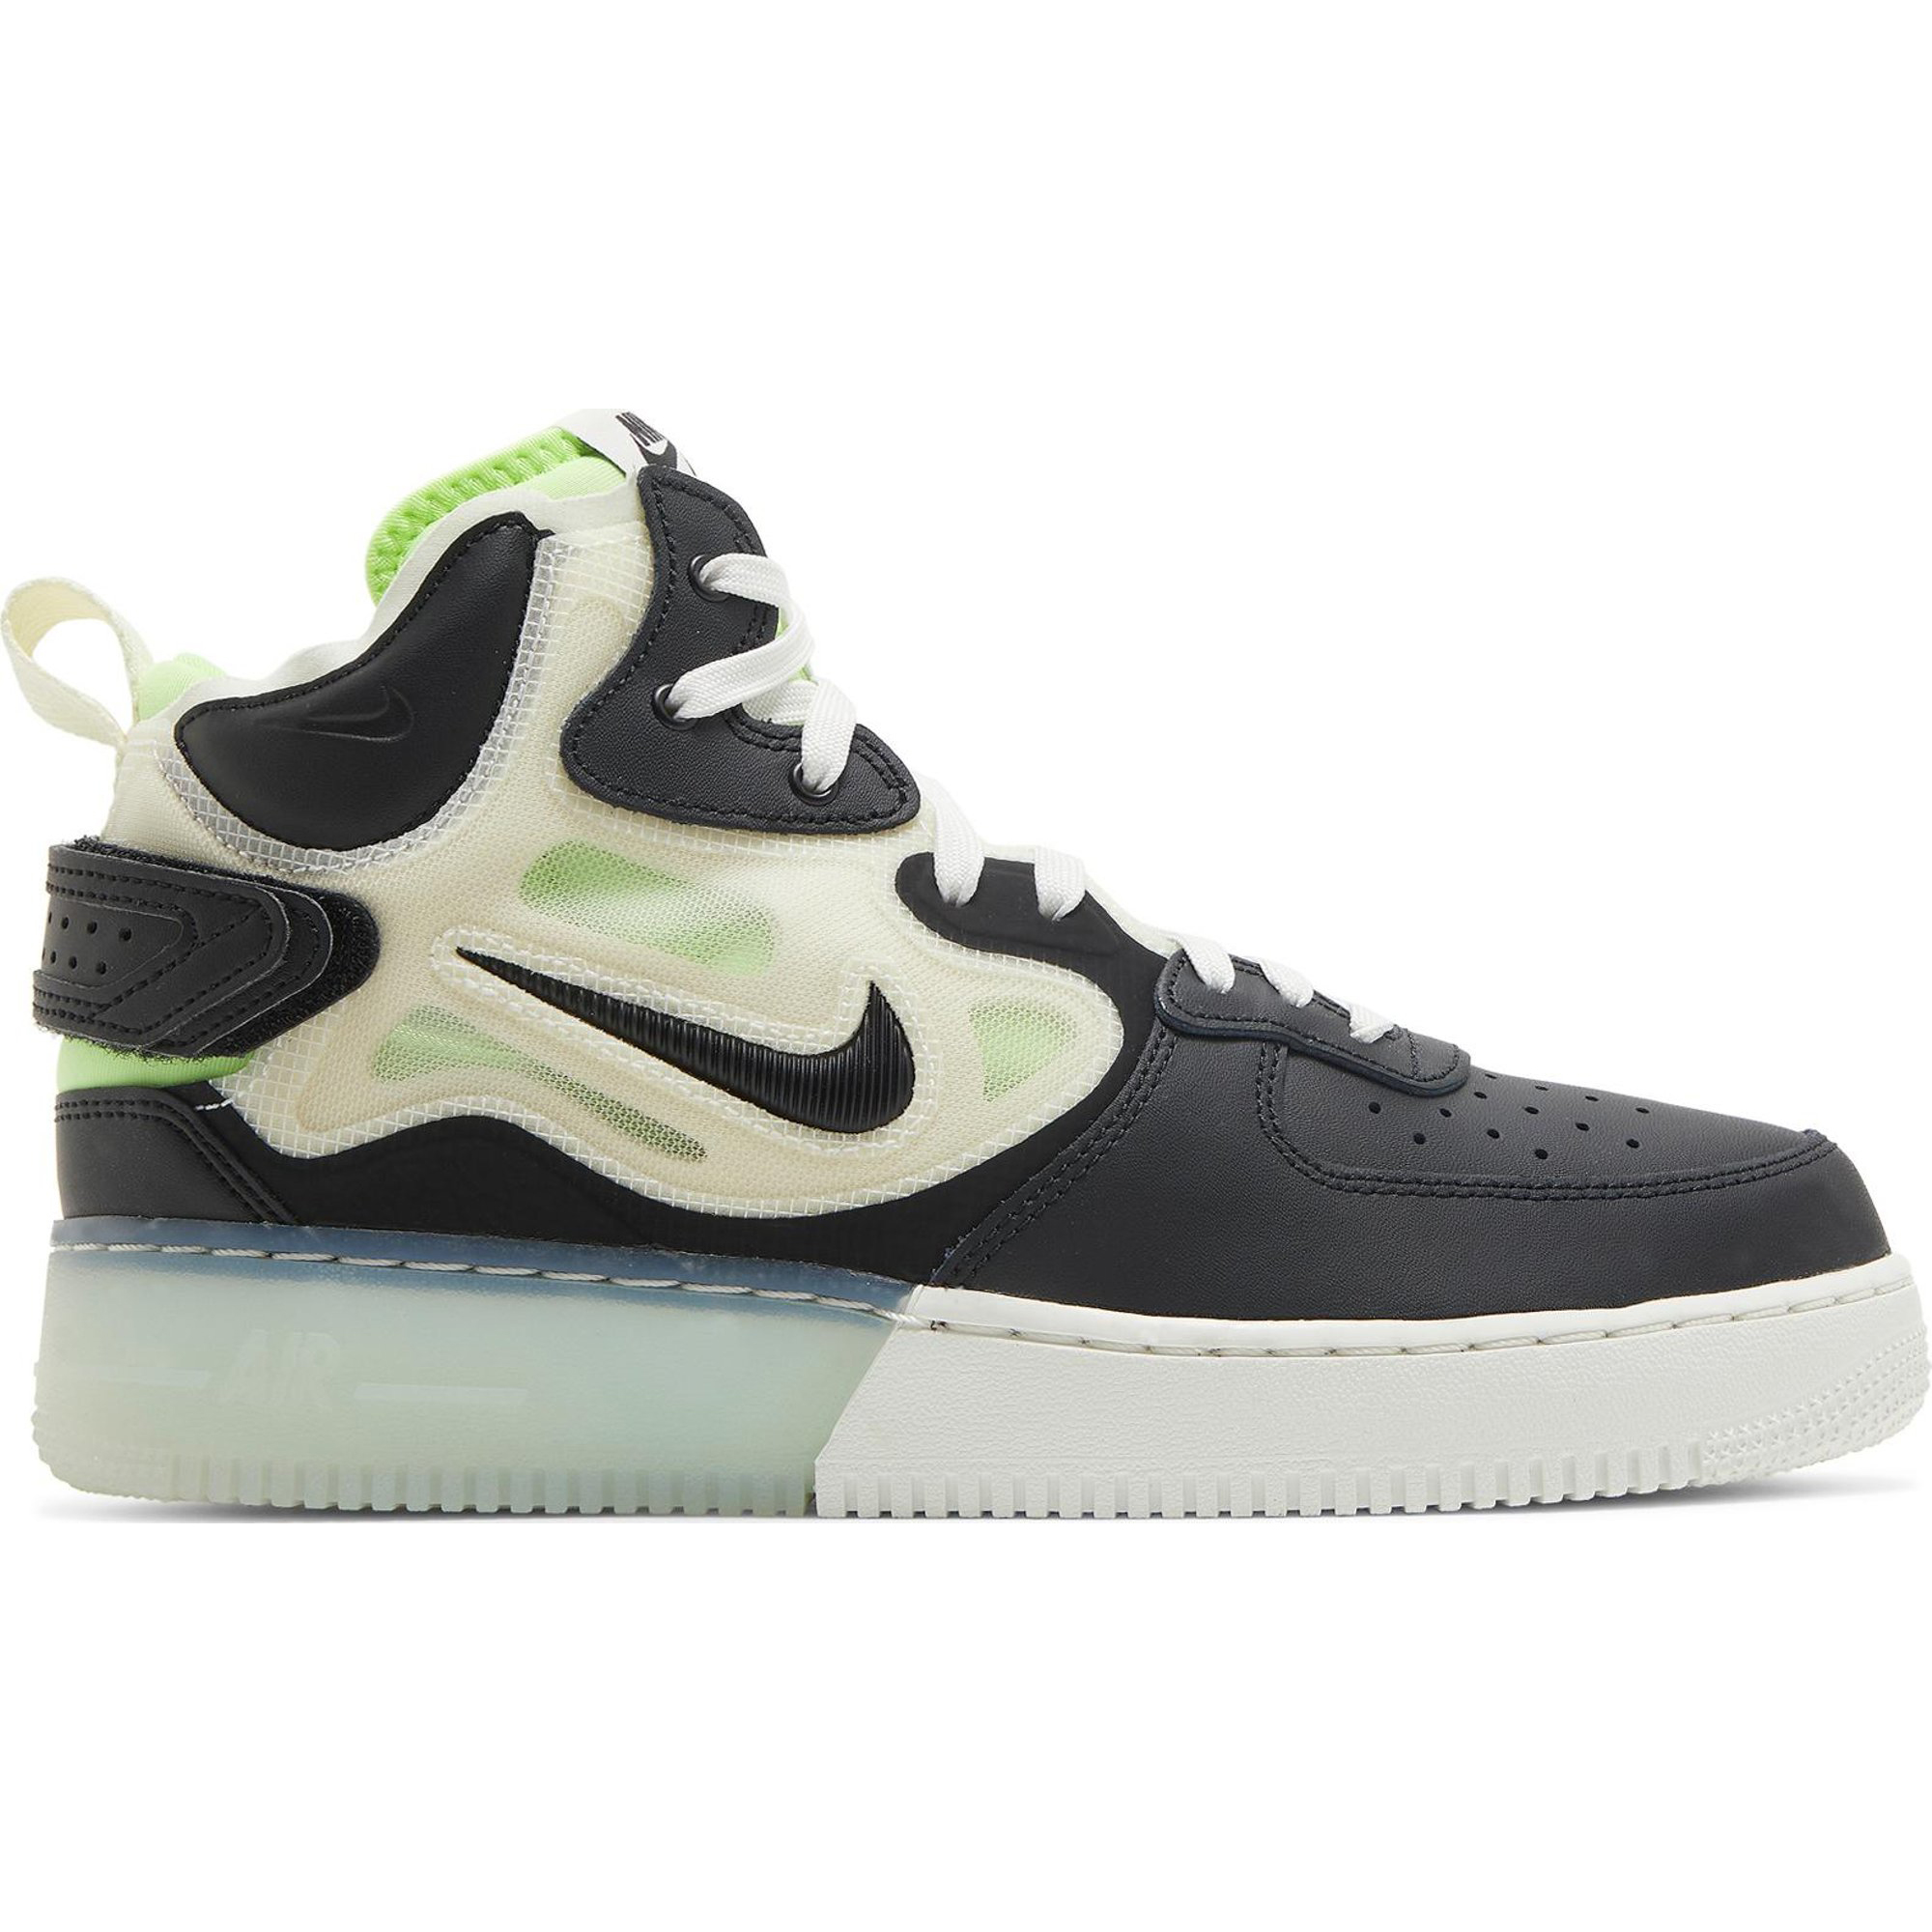 Кроссовки Nike Air Force 1 Mid React, белый кроссовки nike sportswear air force 1 mid react sail black ghost green glacier blue coconut milk